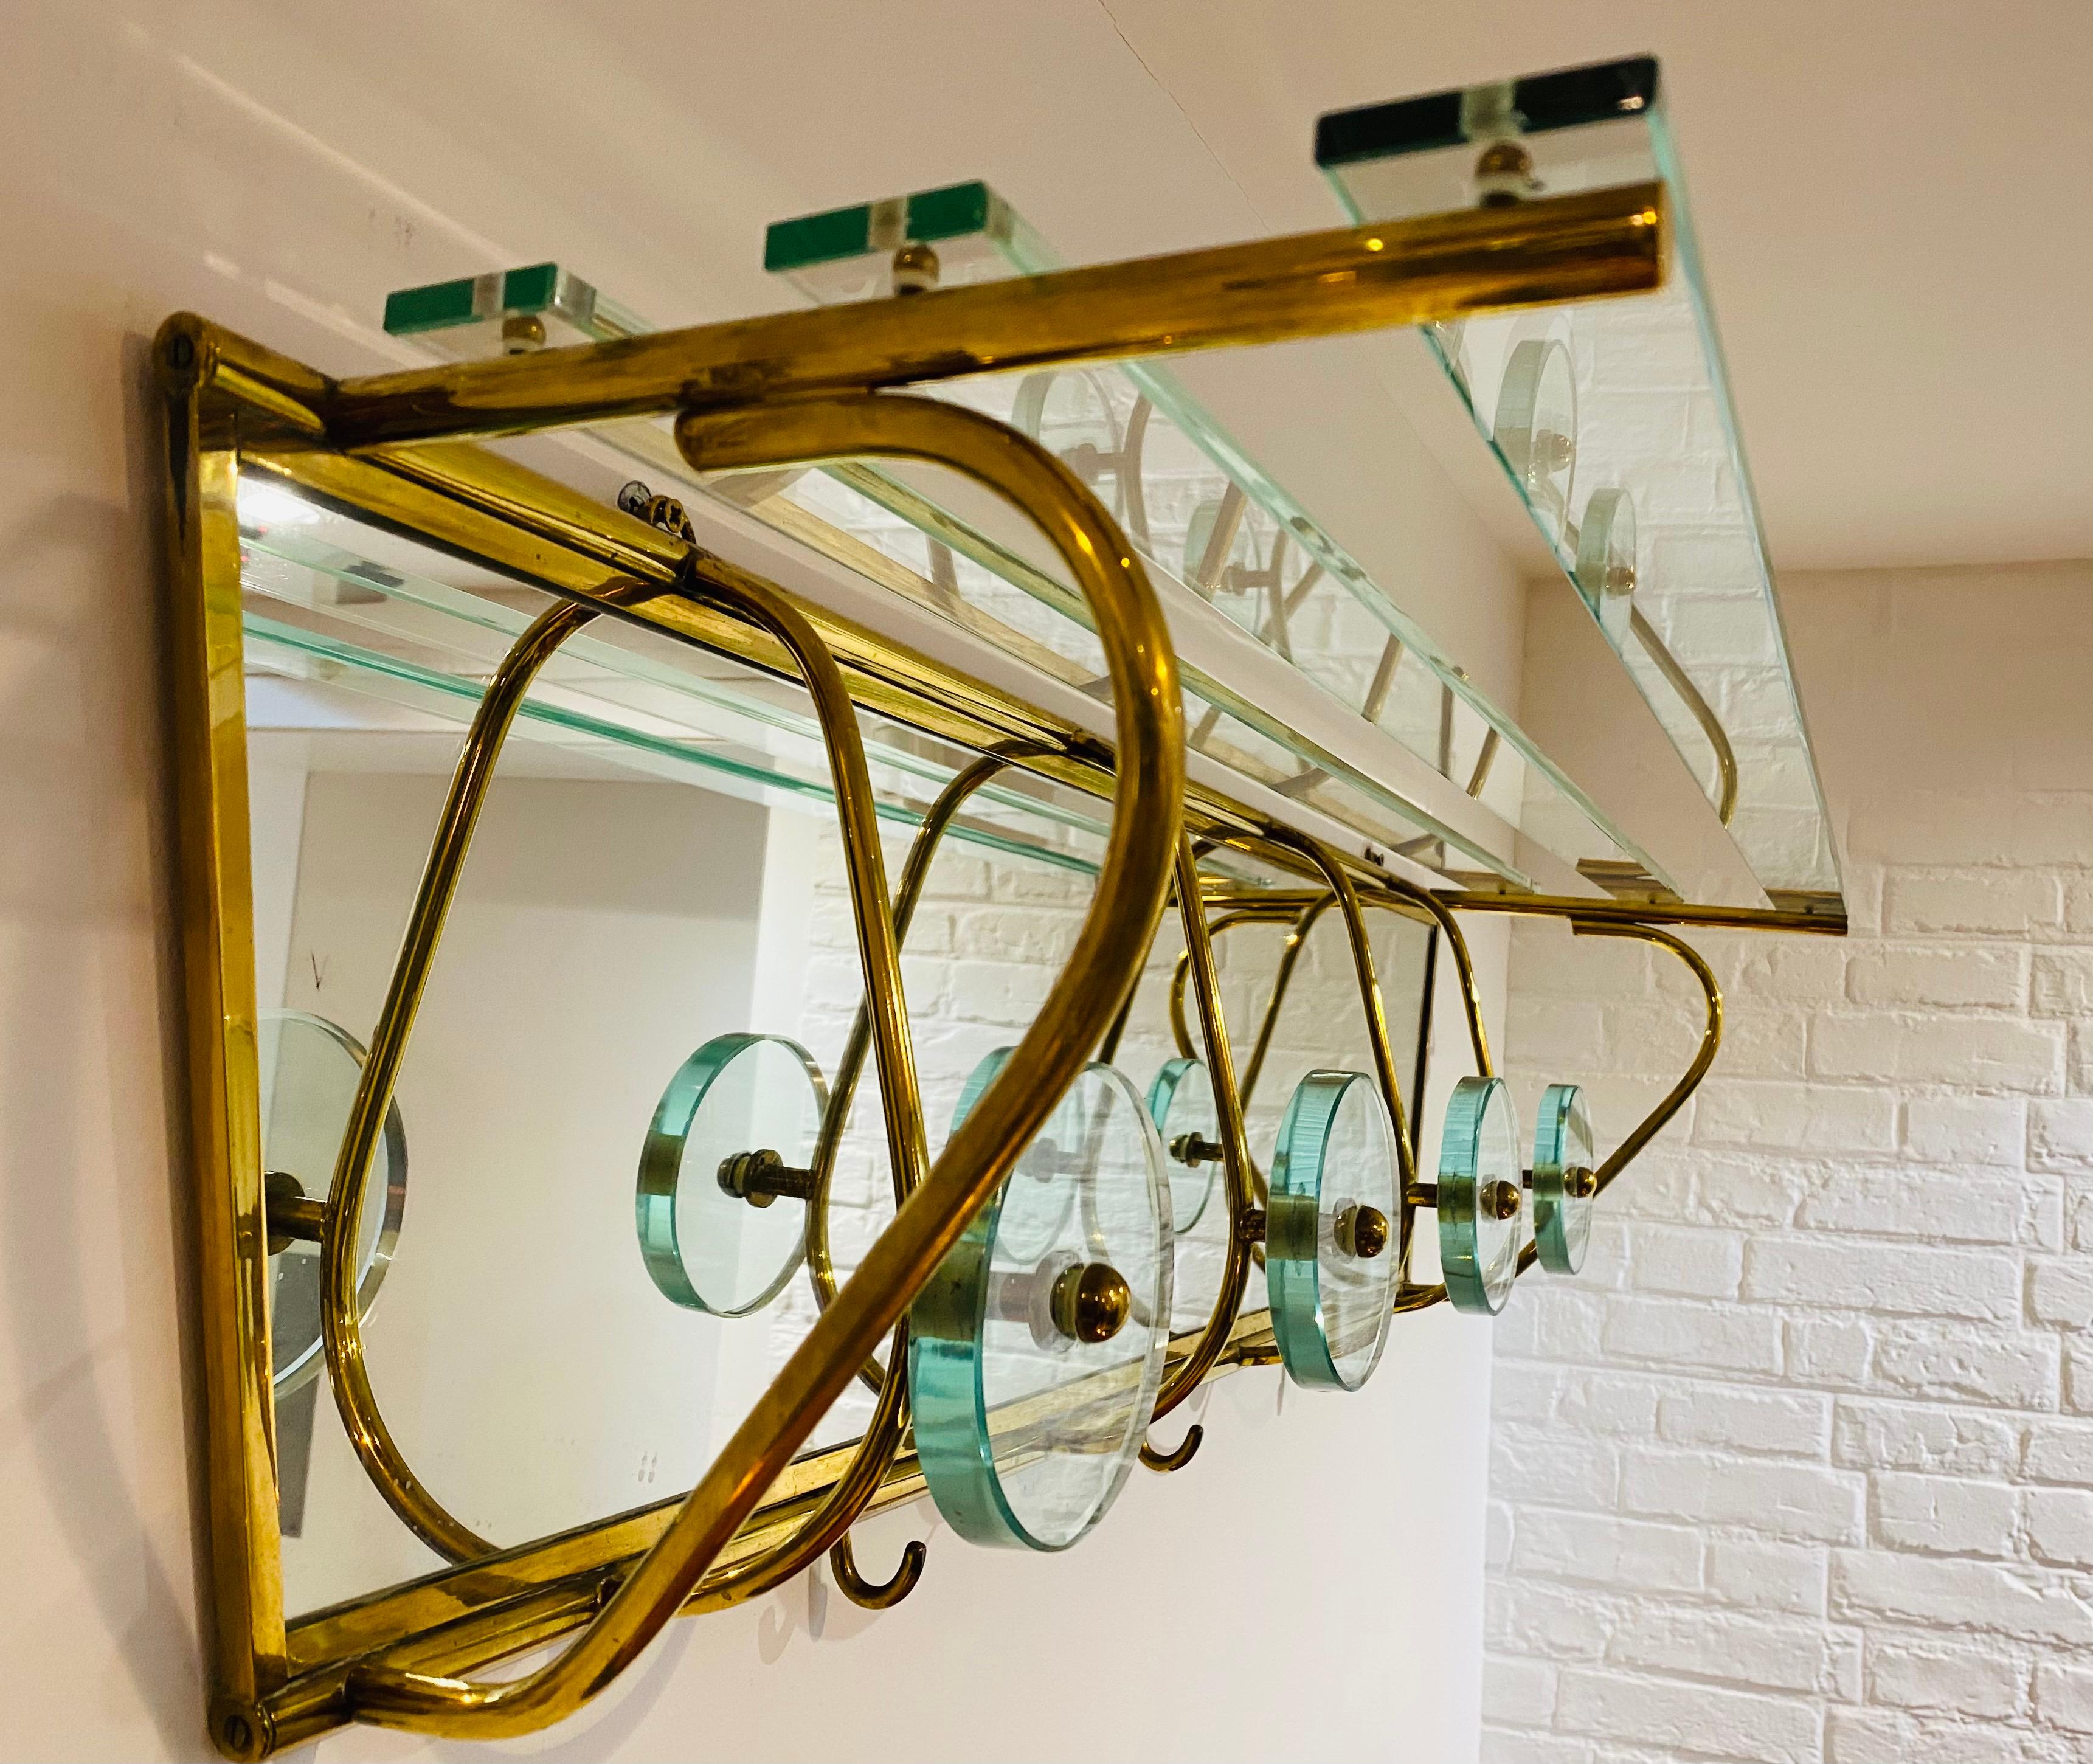 An attractive glass and brass Italian wall mount coat and hat rack att. to Fontana Arte. The rack consists of 4 thick glass discs on a mirrored background, 3 brass hooks, and glass shelves for hats on top.